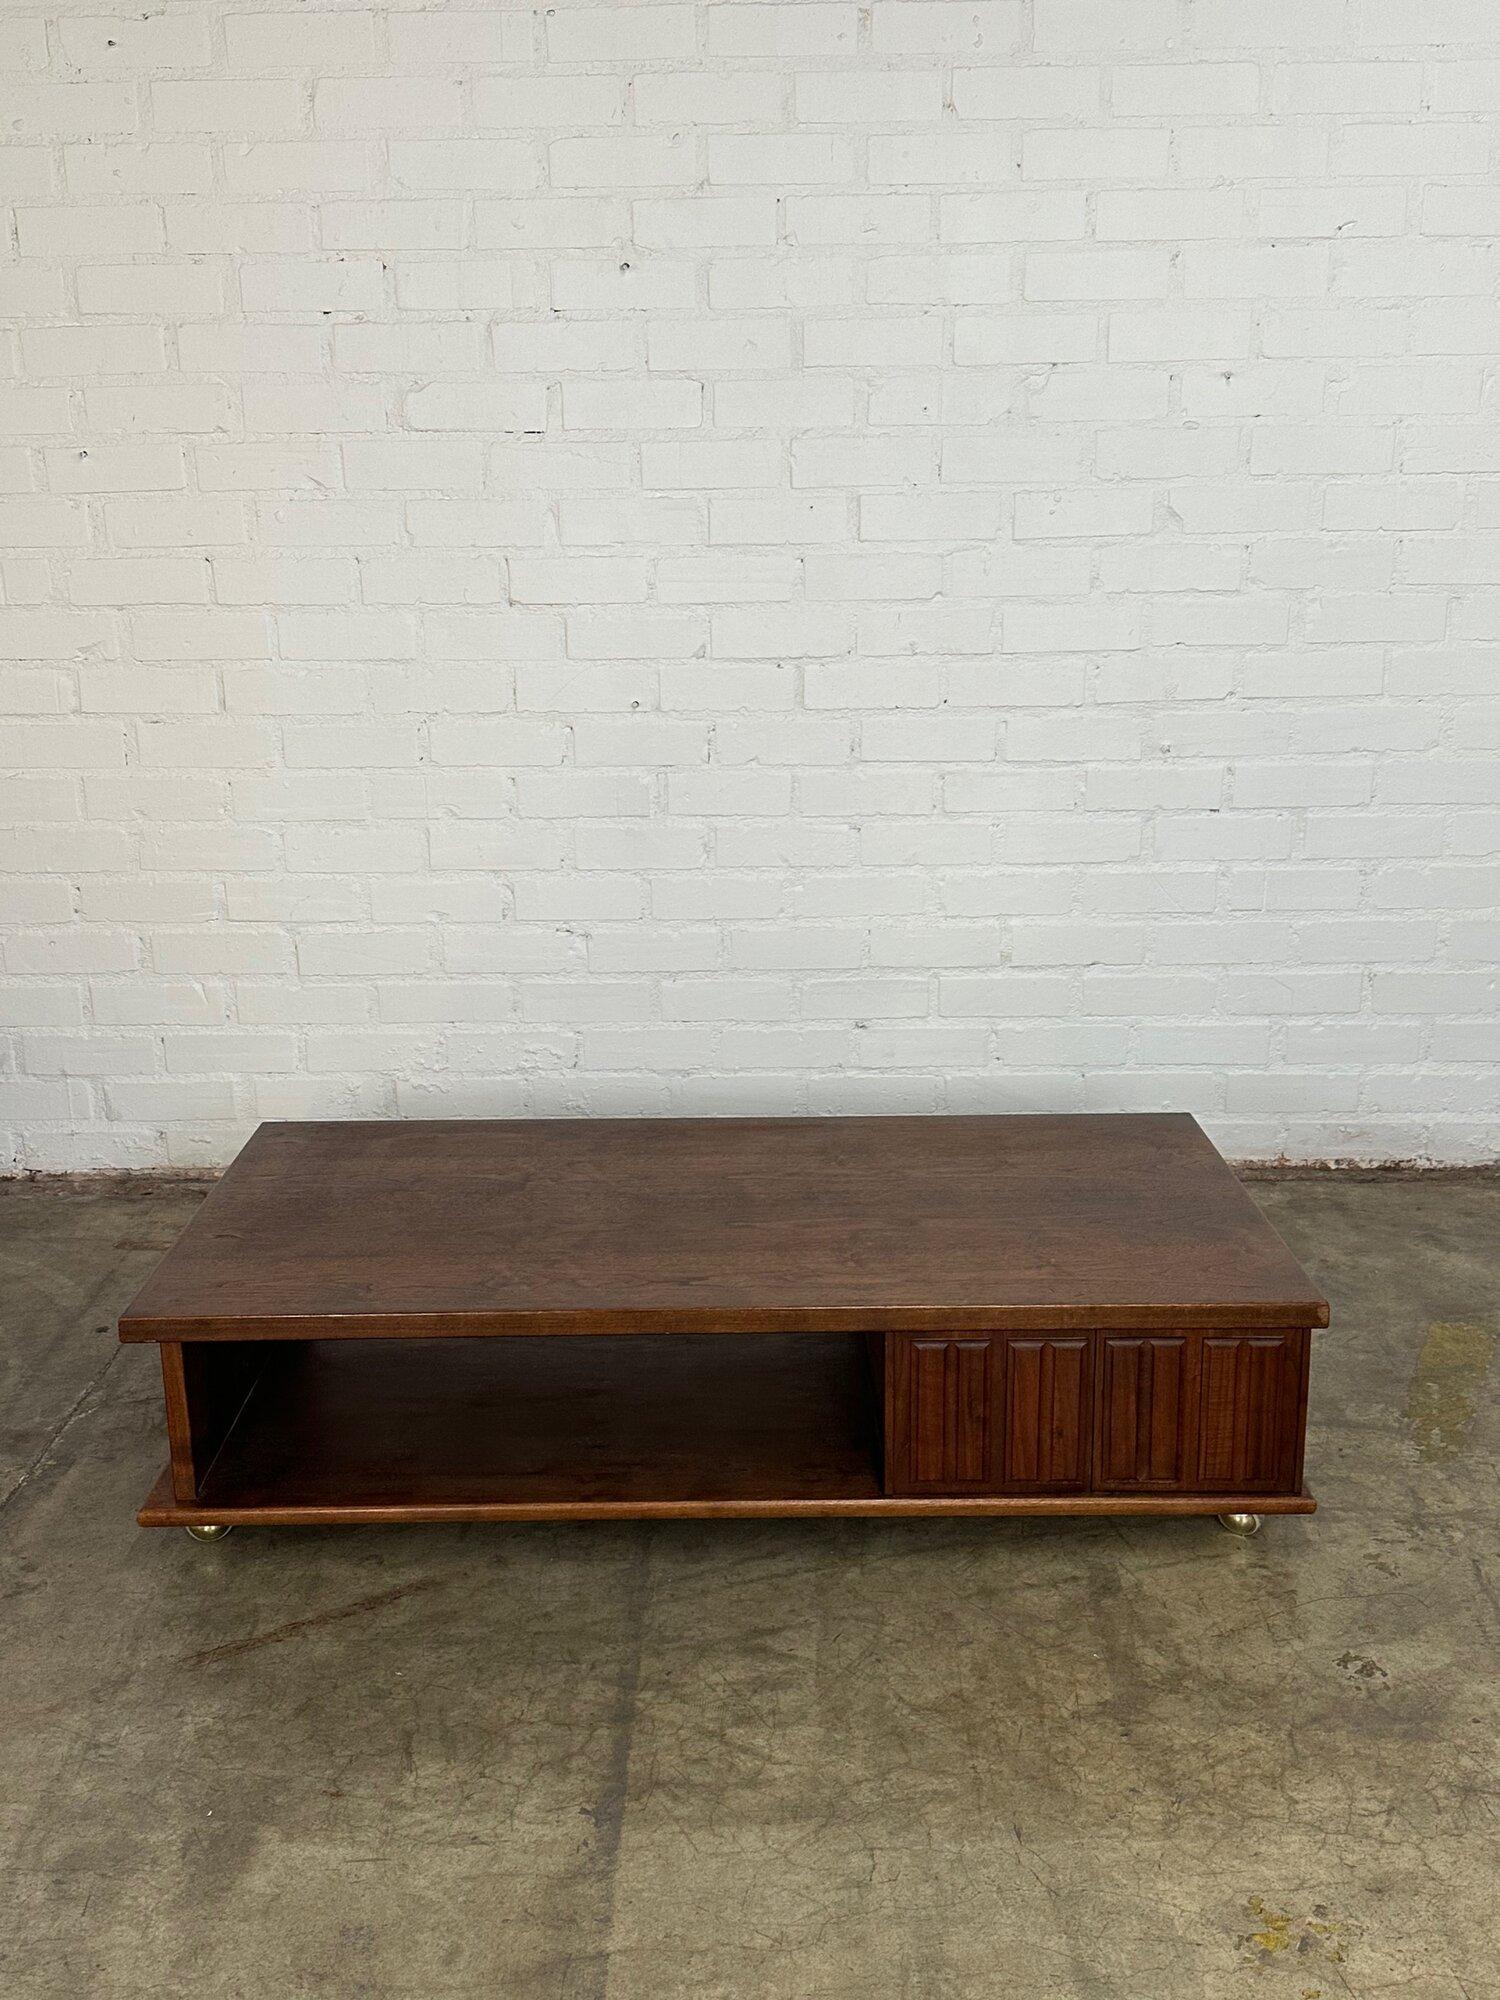 W60 D30 H14

Solid walnut low profile coffee table on brass plated casters. Item is in structurally sound and sturdy condition. Item is in great AS FOUND condition. Minor areas of wear have been closely pictured but overall item shows well and is